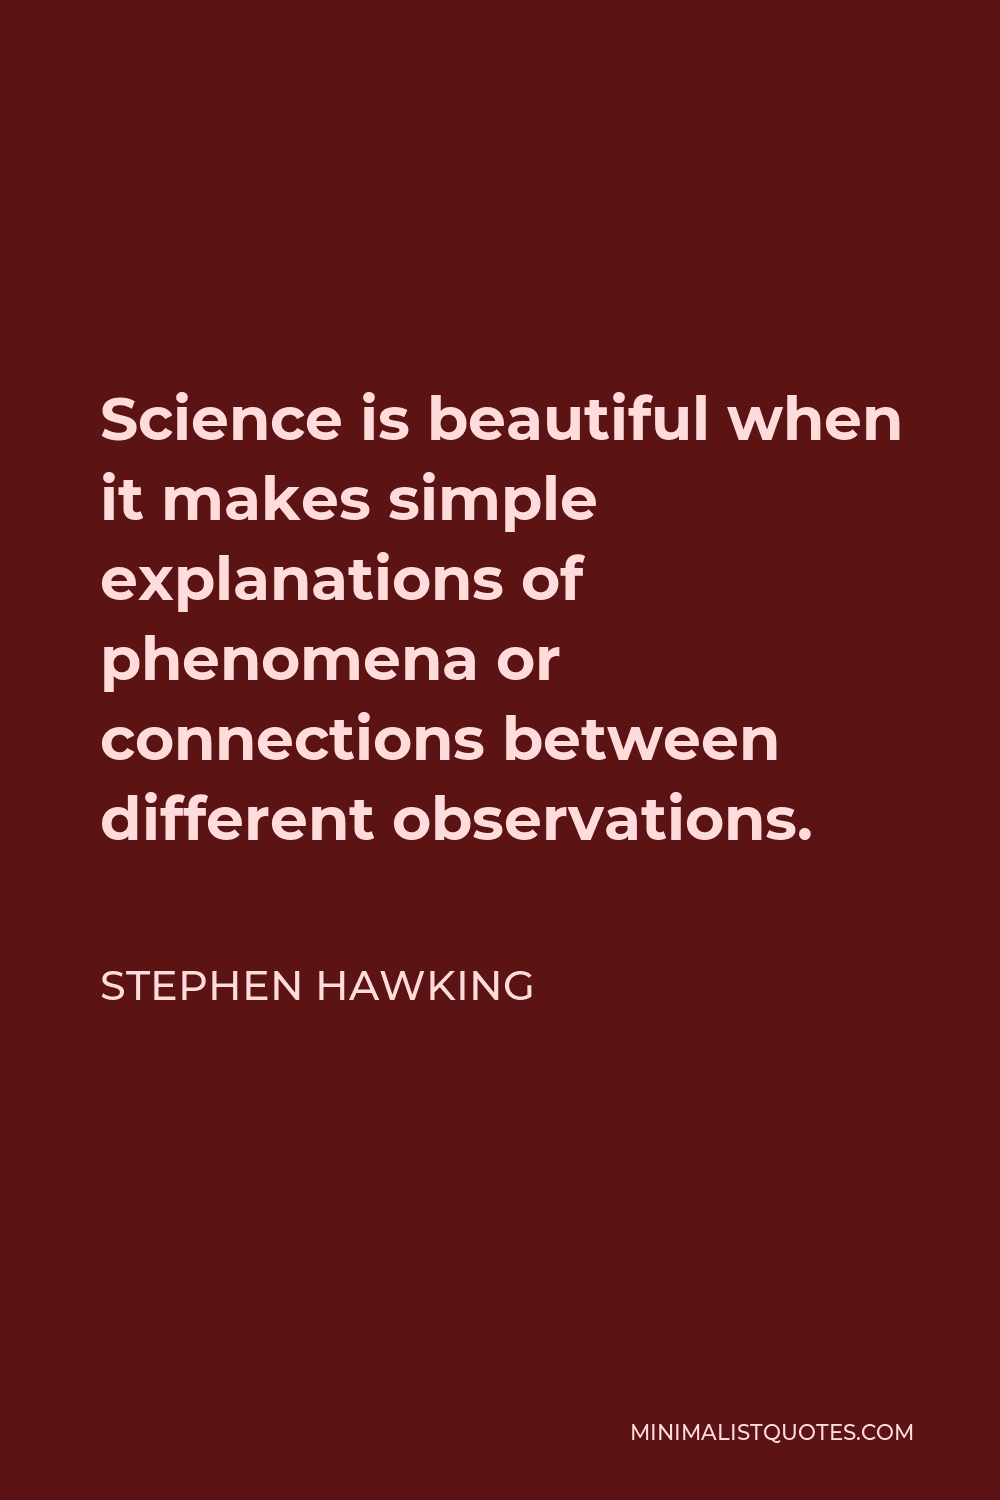 Stephen Hawking Quote - Science is beautiful when it makes simple explanations of phenomena or connections between different observations.